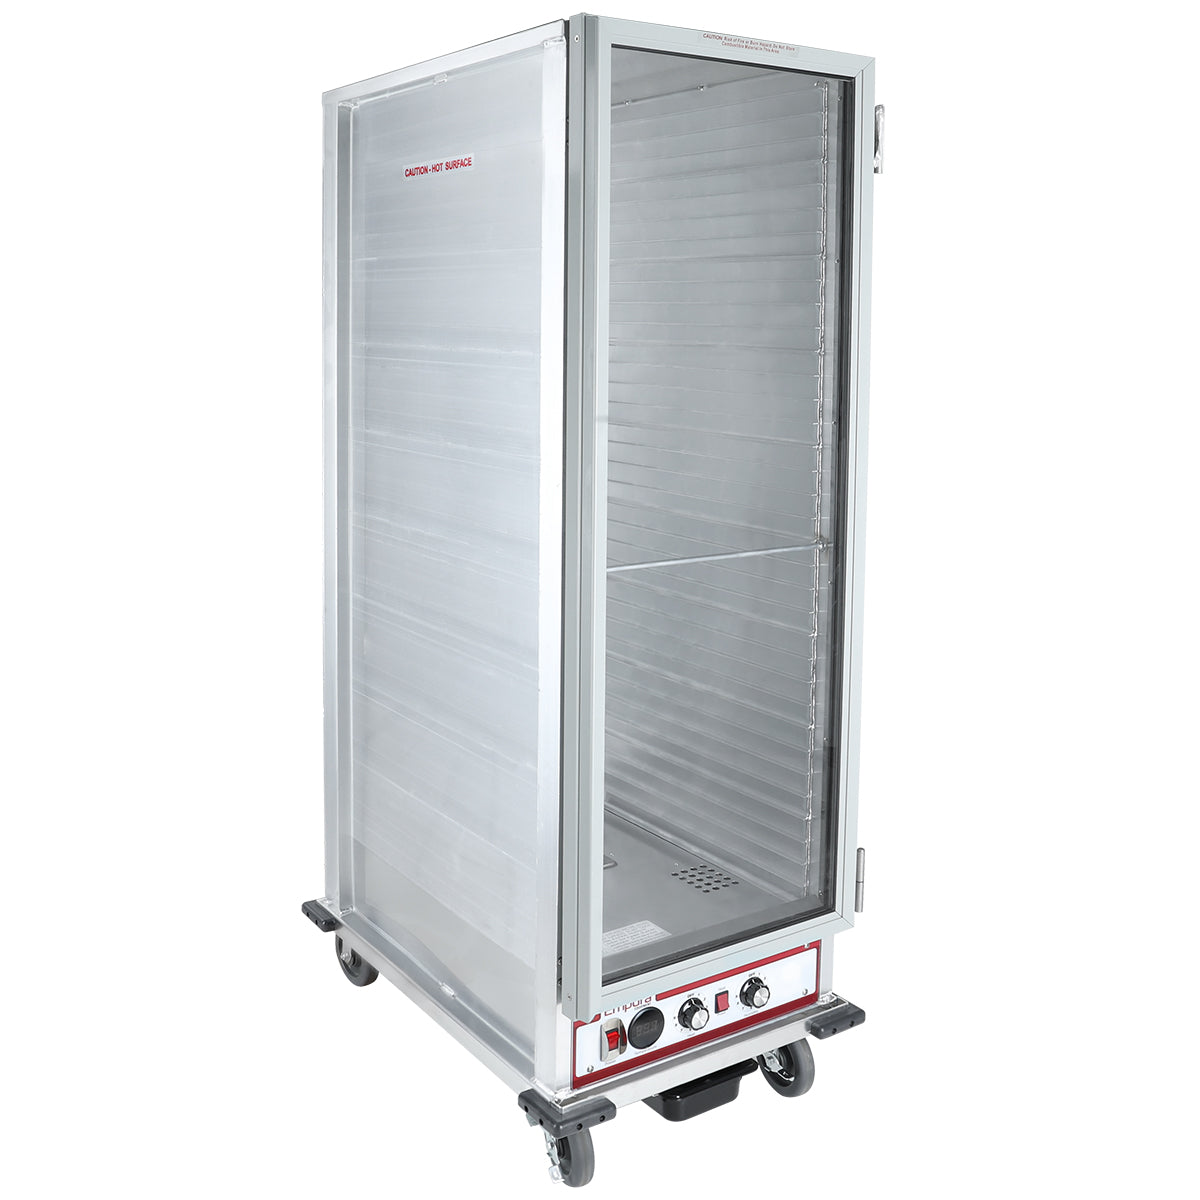 Empura E-HP1836 Full-Height Non-Insulated Mobile Heavy-Duty Anodized Aluminum Heated Proofer And Holding Cabinet With 1 Clear Polycarbonate Door